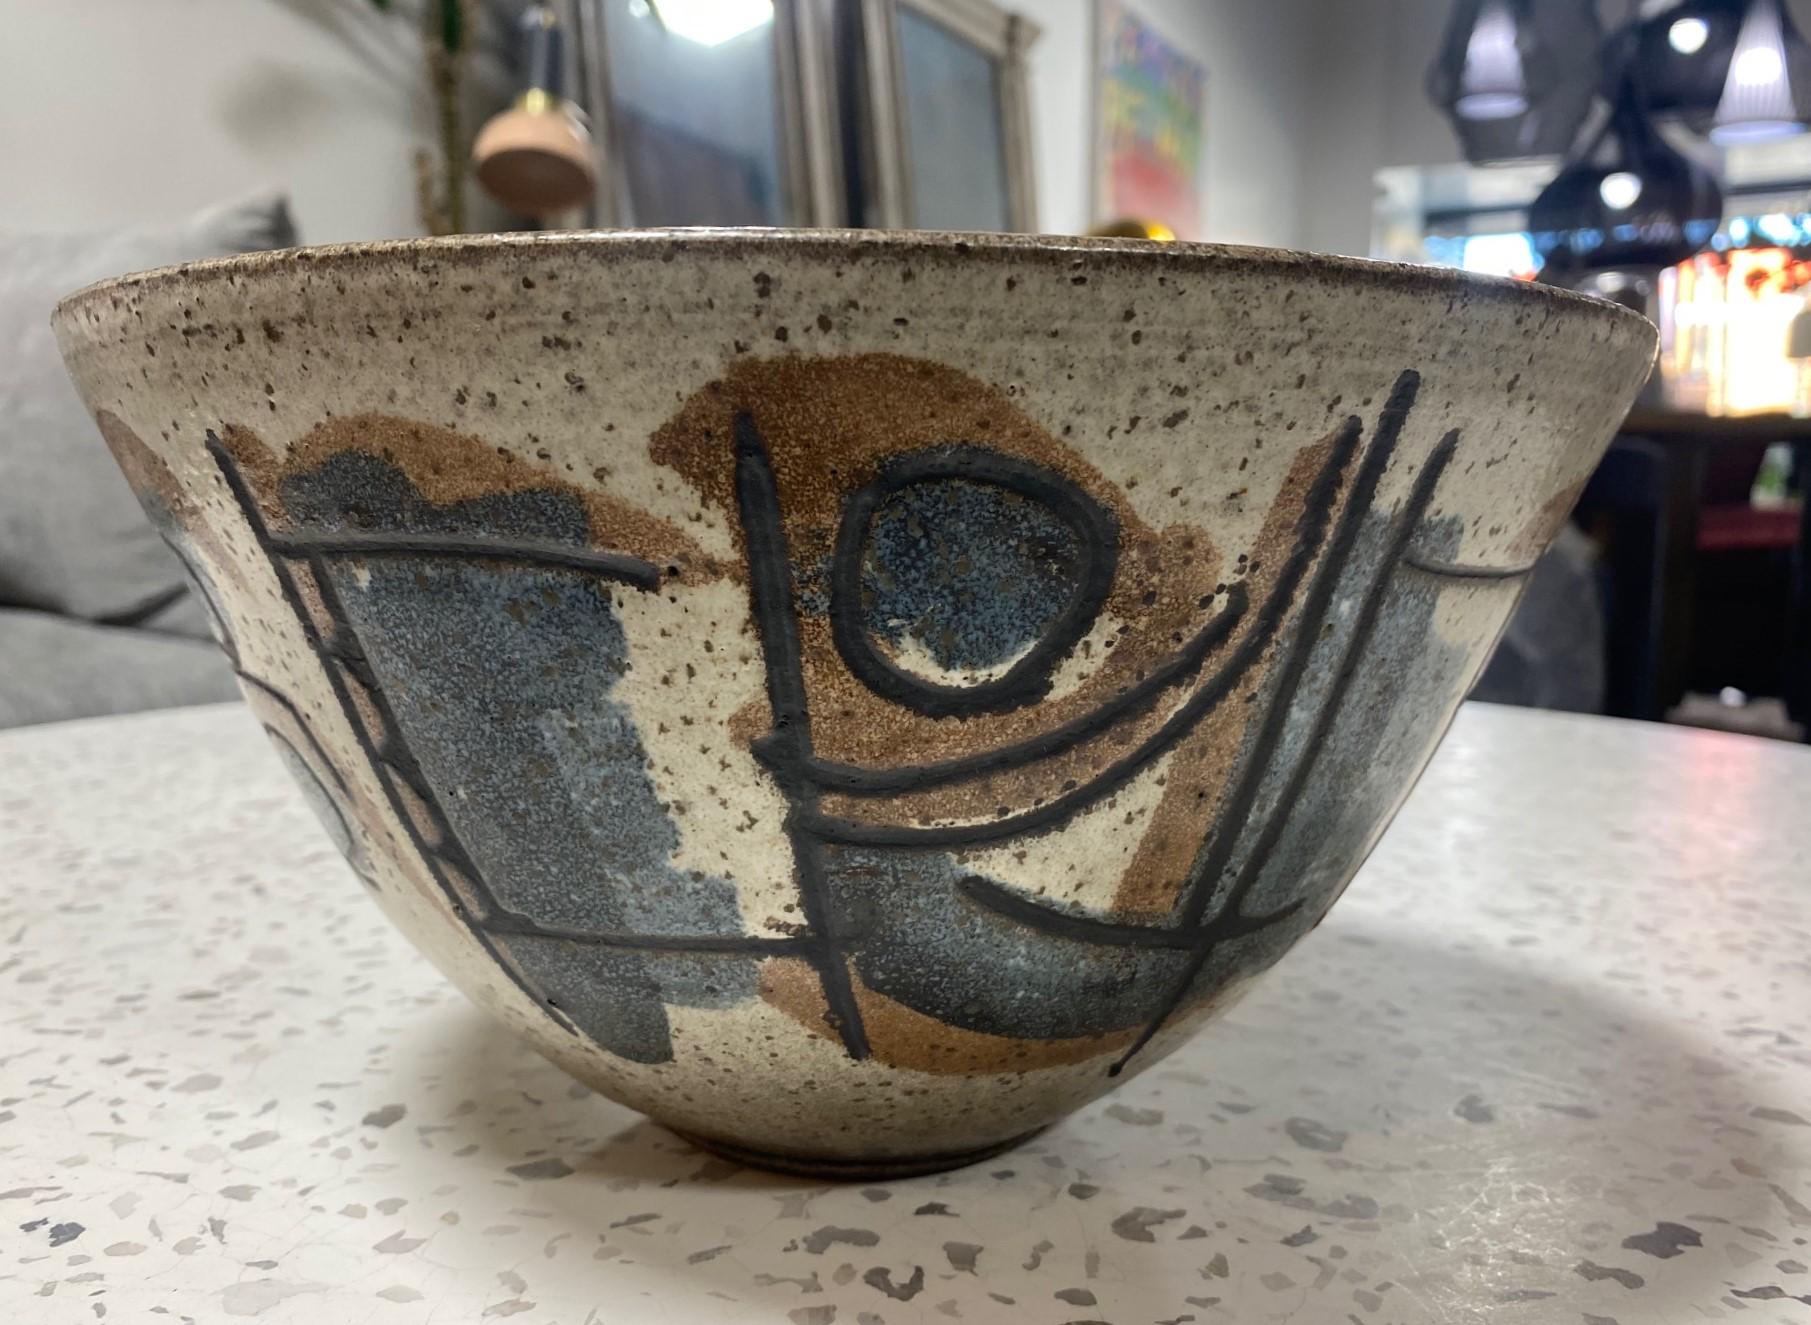 A wonderful and quite impressive large, heavy, hand-decorated bowl by Ohio-born Midwest American master potter/ artist Cyde Burt who early in his career studied under Maija Grotell at Cranbrook Academy of Art. This work is truly a fine example of